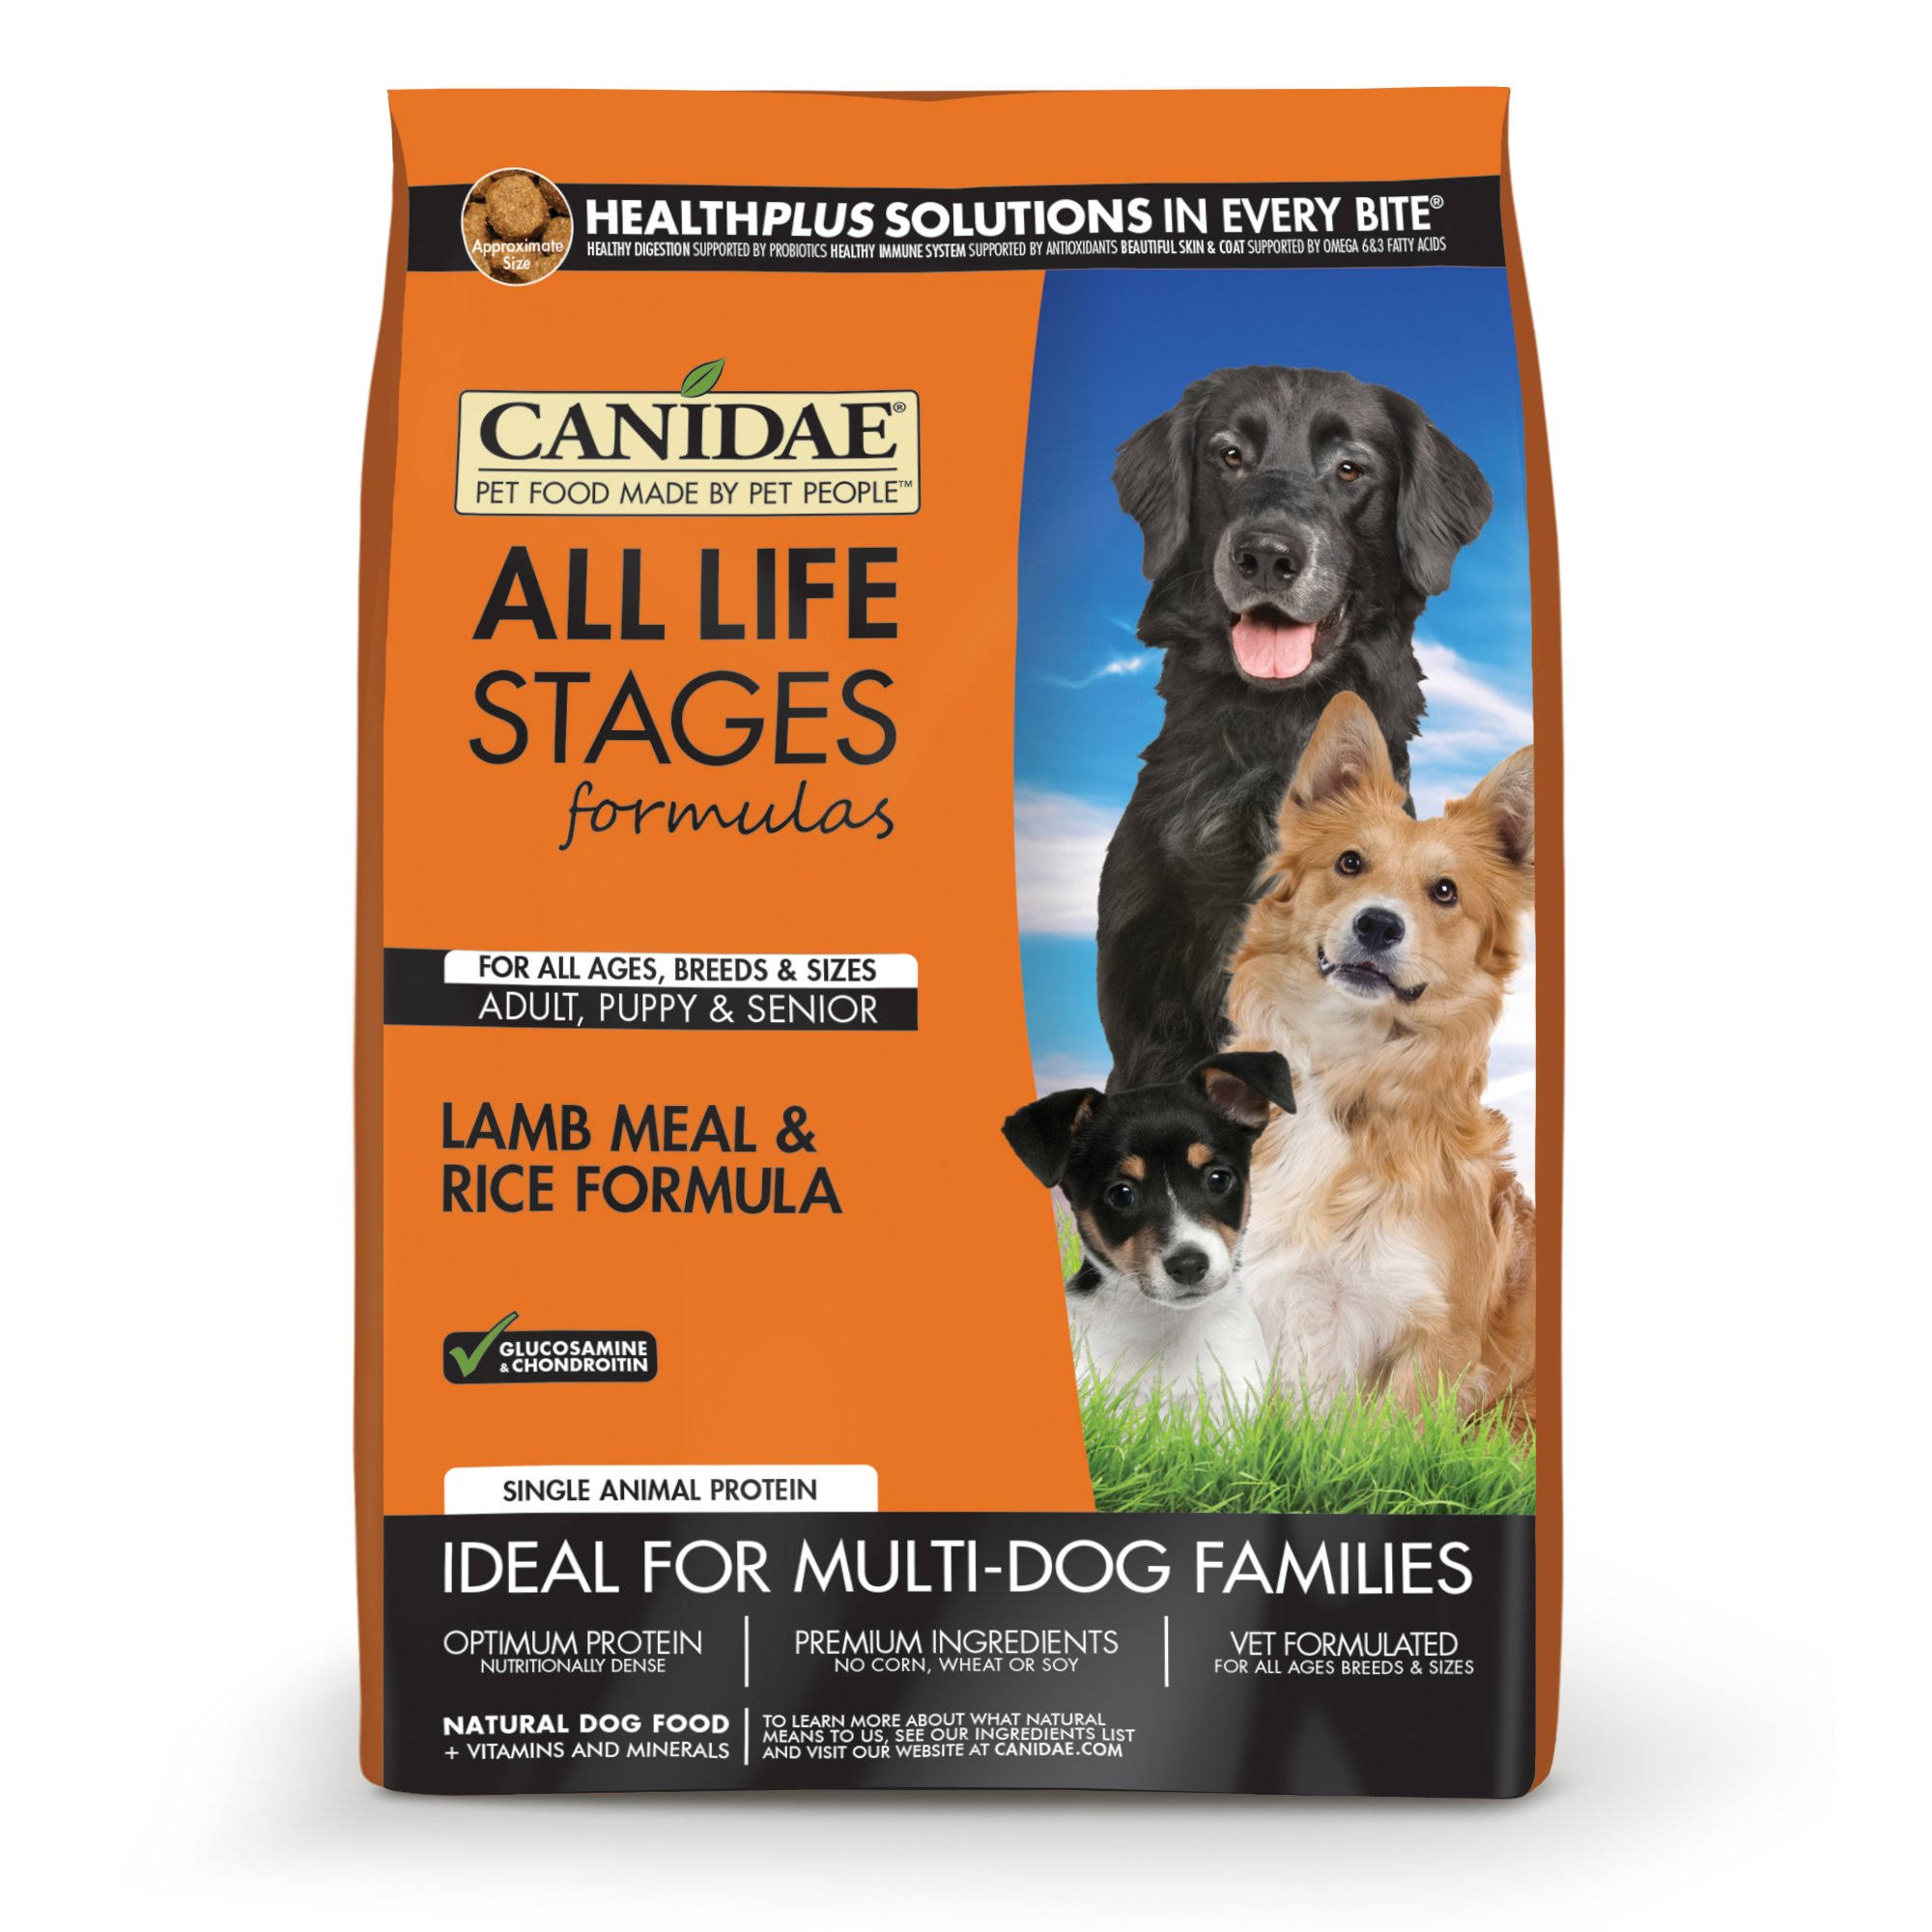 Canidae All Breeds Dog Dry Food - Lamb & Rice, 13.6kg